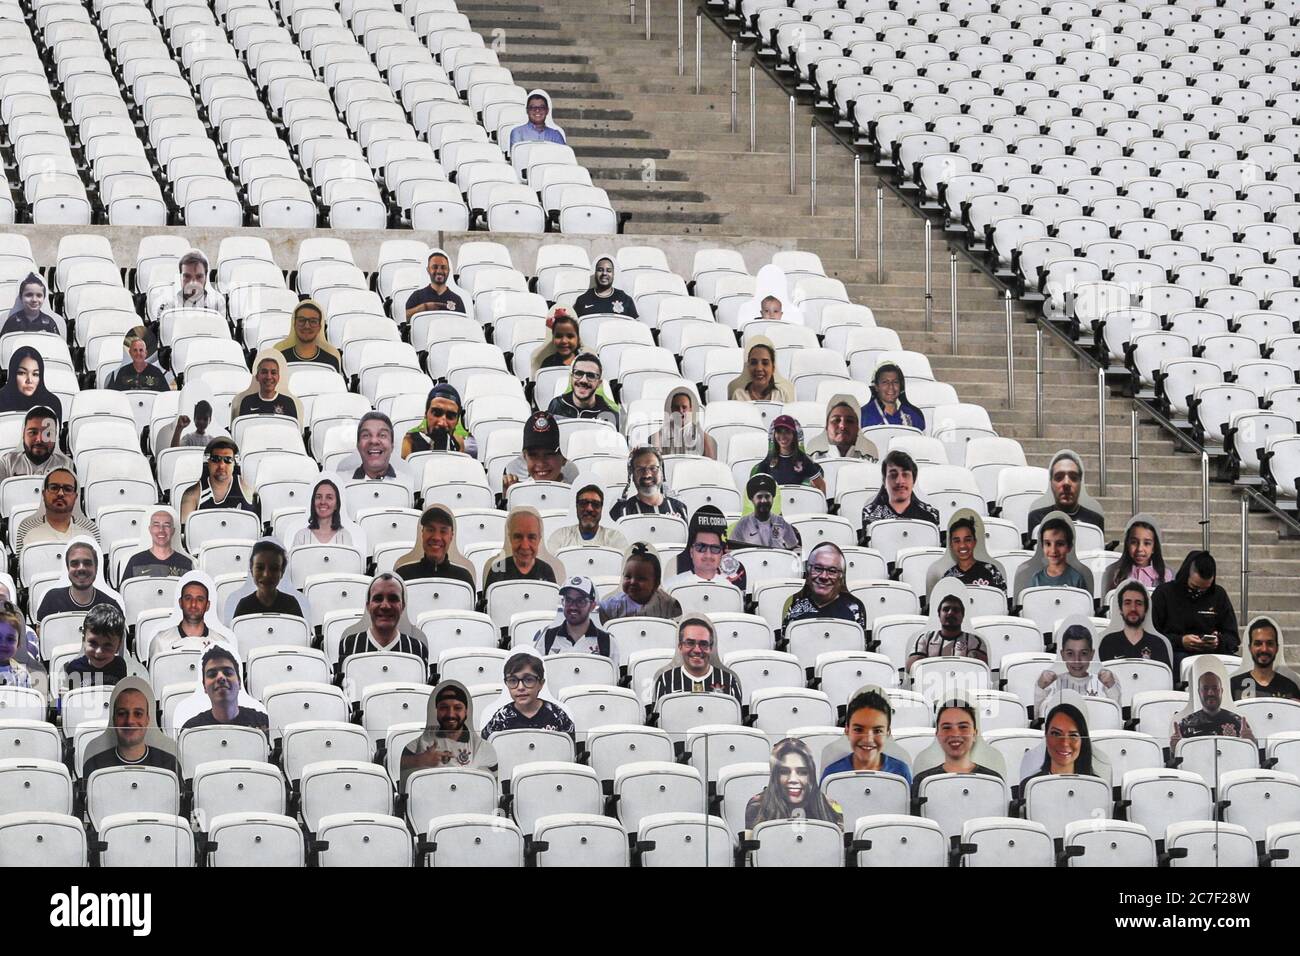 (200717) -- SAO PAULO, July 17, 2020 (Xinhua) -- Cutout photos of fans are seen on the stand at the Arena Corinthians in Sao Paulo, Brazil, July 16, 2020. Sao Paulo's regional football championship will resume on July 22. Matches will be played behind closed doors and under strict sanitary protocols. The Brazilian government reported on Thursday that the country has registered over 2 million cases of the novel coronavirus after 45,403 new cases were confirmed in the last 24 hours, for a total of 2,012,151. According to the Ministry of Health, 1,322 deaths were recorded in the last 24-hour peri Stock Photo